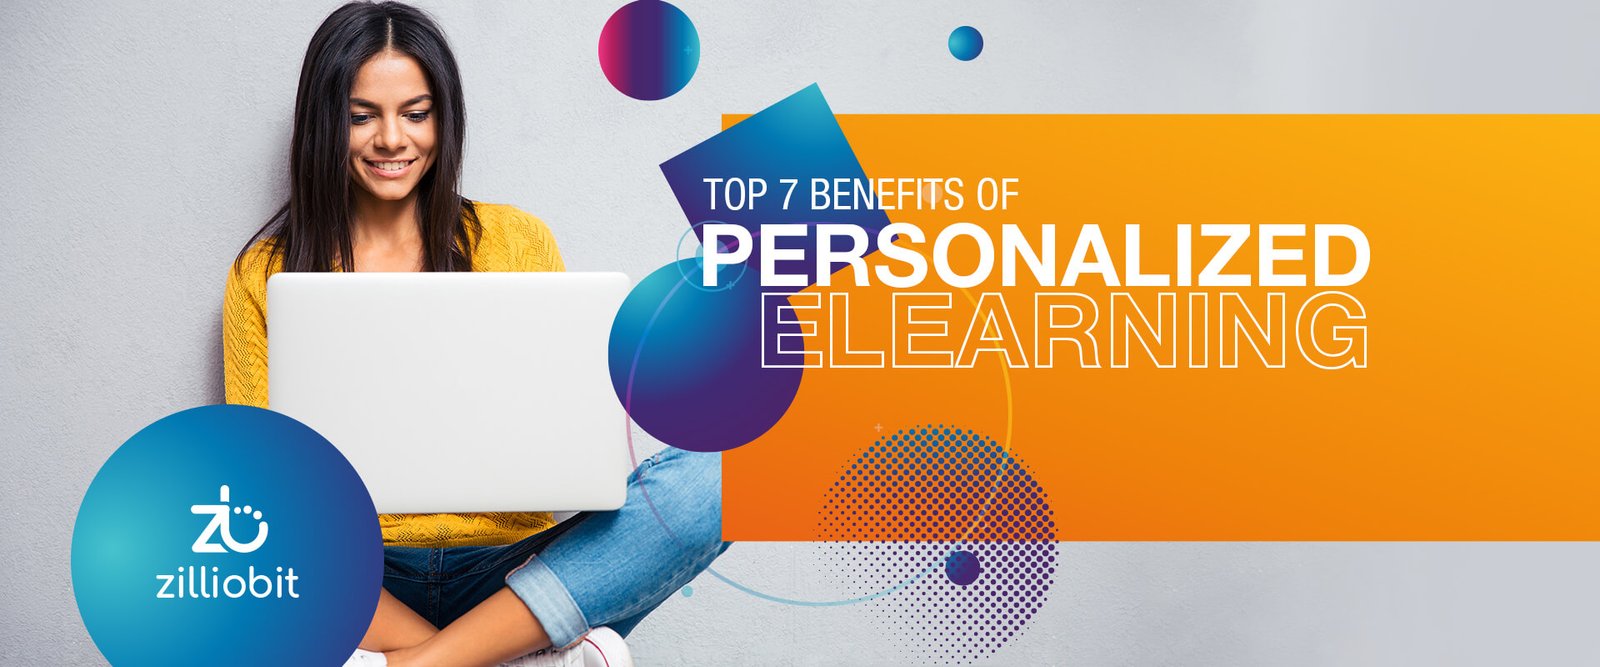 Top 7 benefits of Personalized eLearning